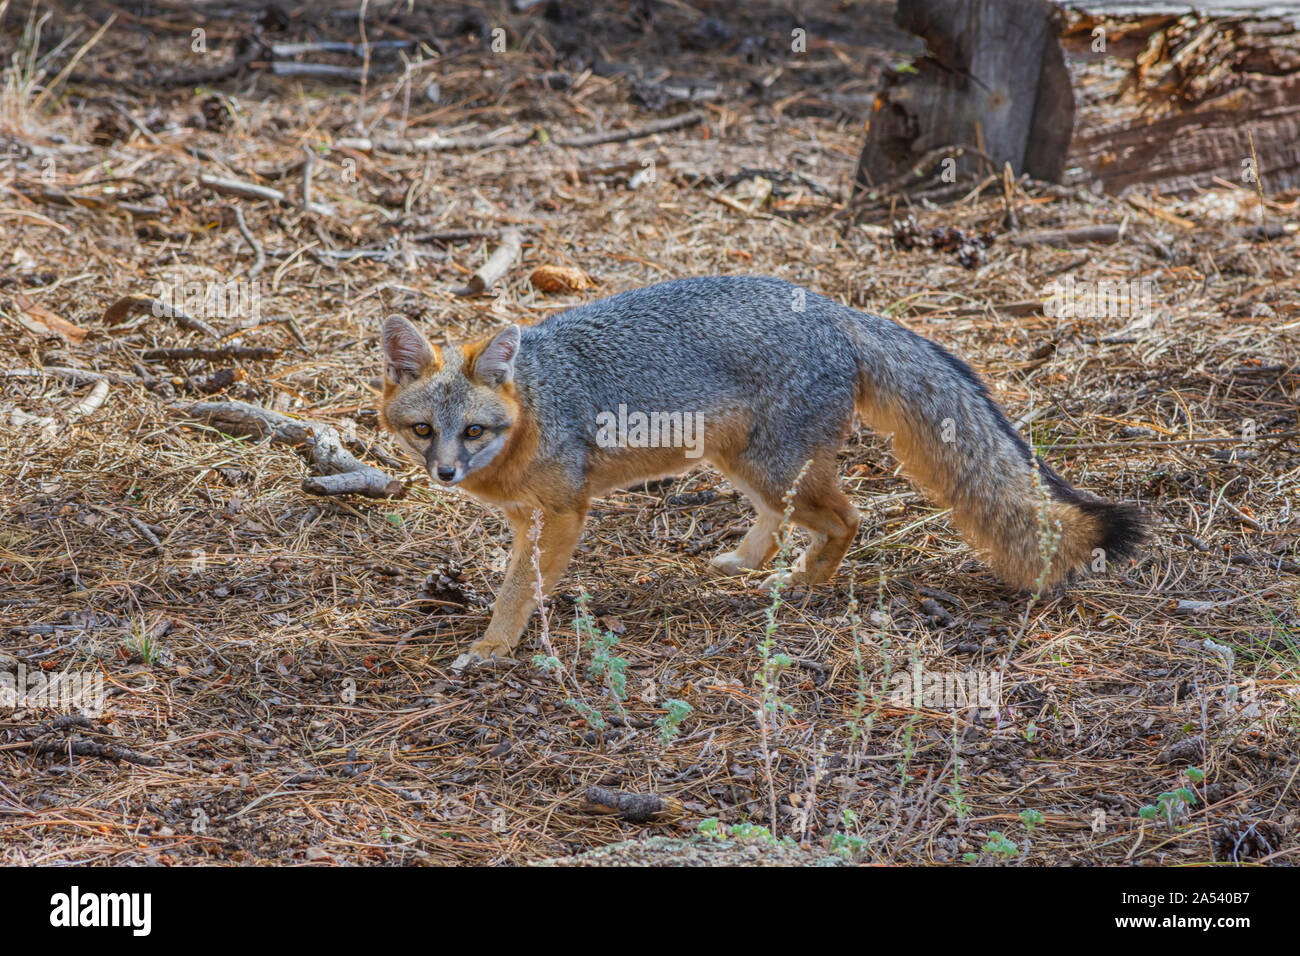 Young Gray Fox or Grey Fox (Urocyon cinereoargenteus) hunting, watches photographer in the Pike National Forest US. Colorado. Photo taken in October. Stock Photo